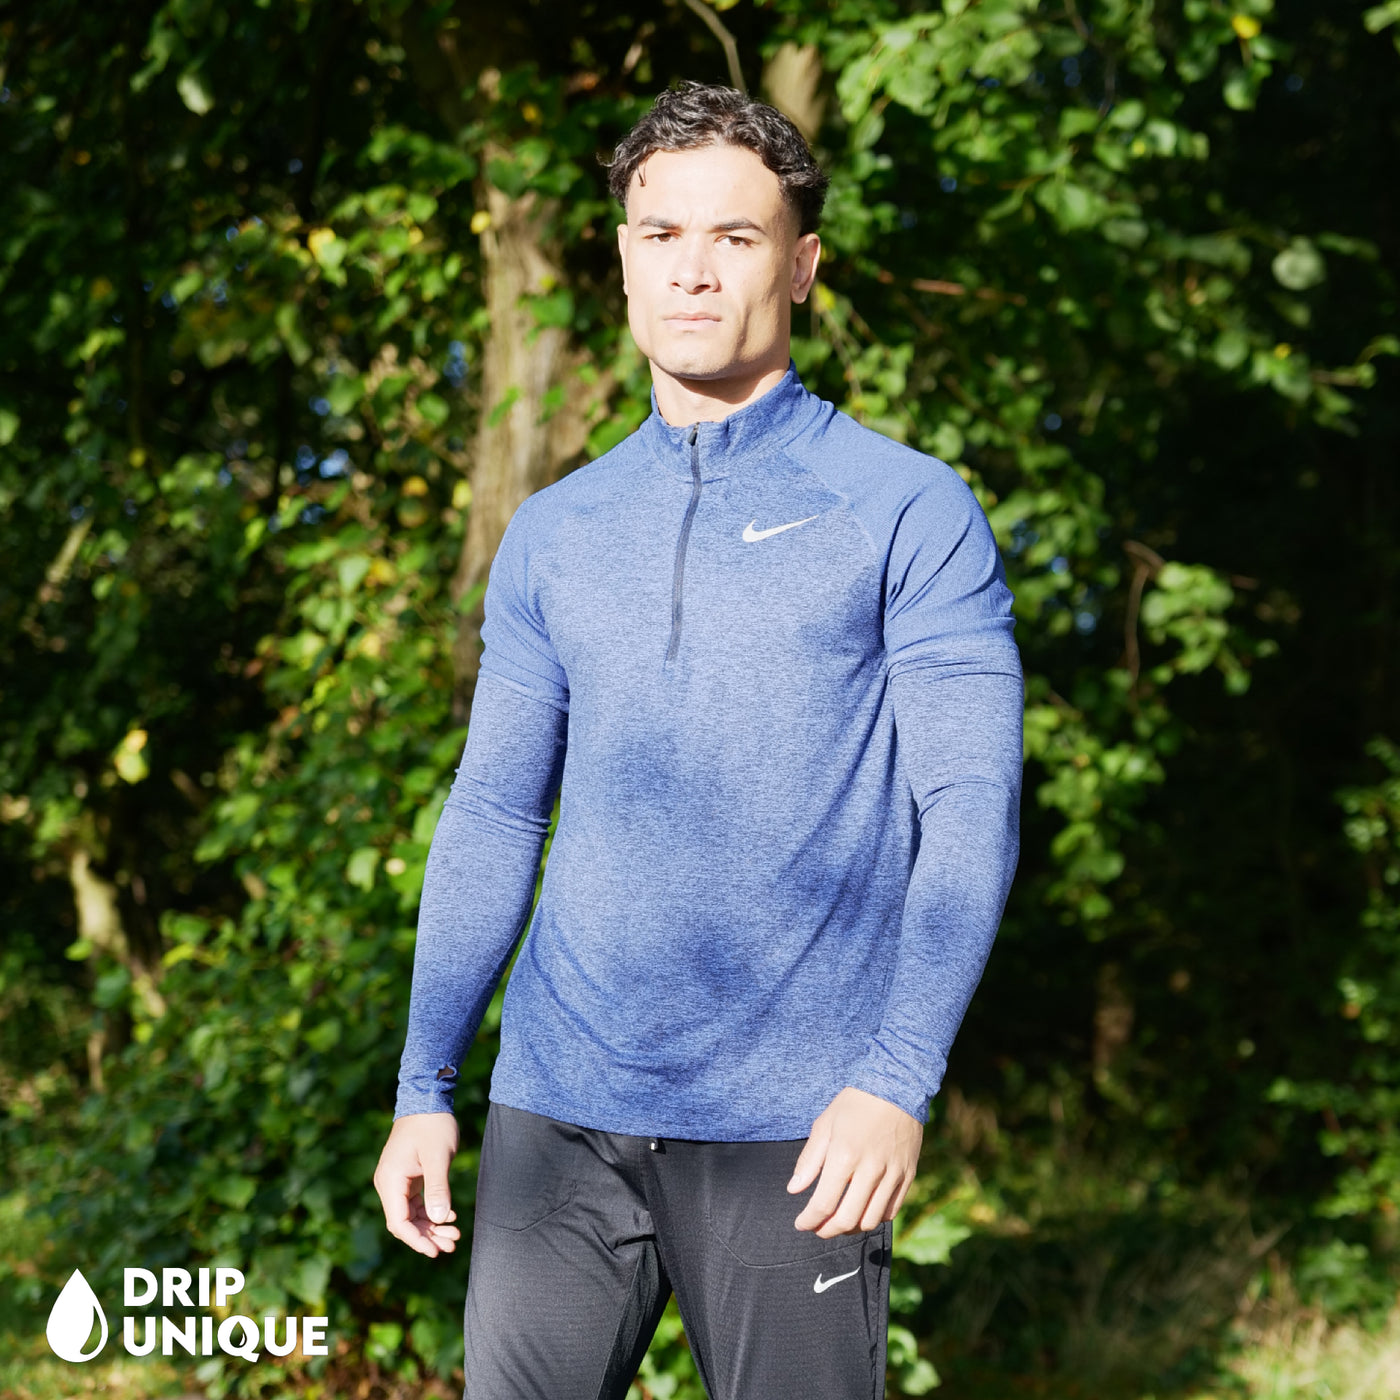 Men's Nike Therma 1/4 Zip Top in a Royal Blue colourway showing the front design worn by our model, dripuniqueuk